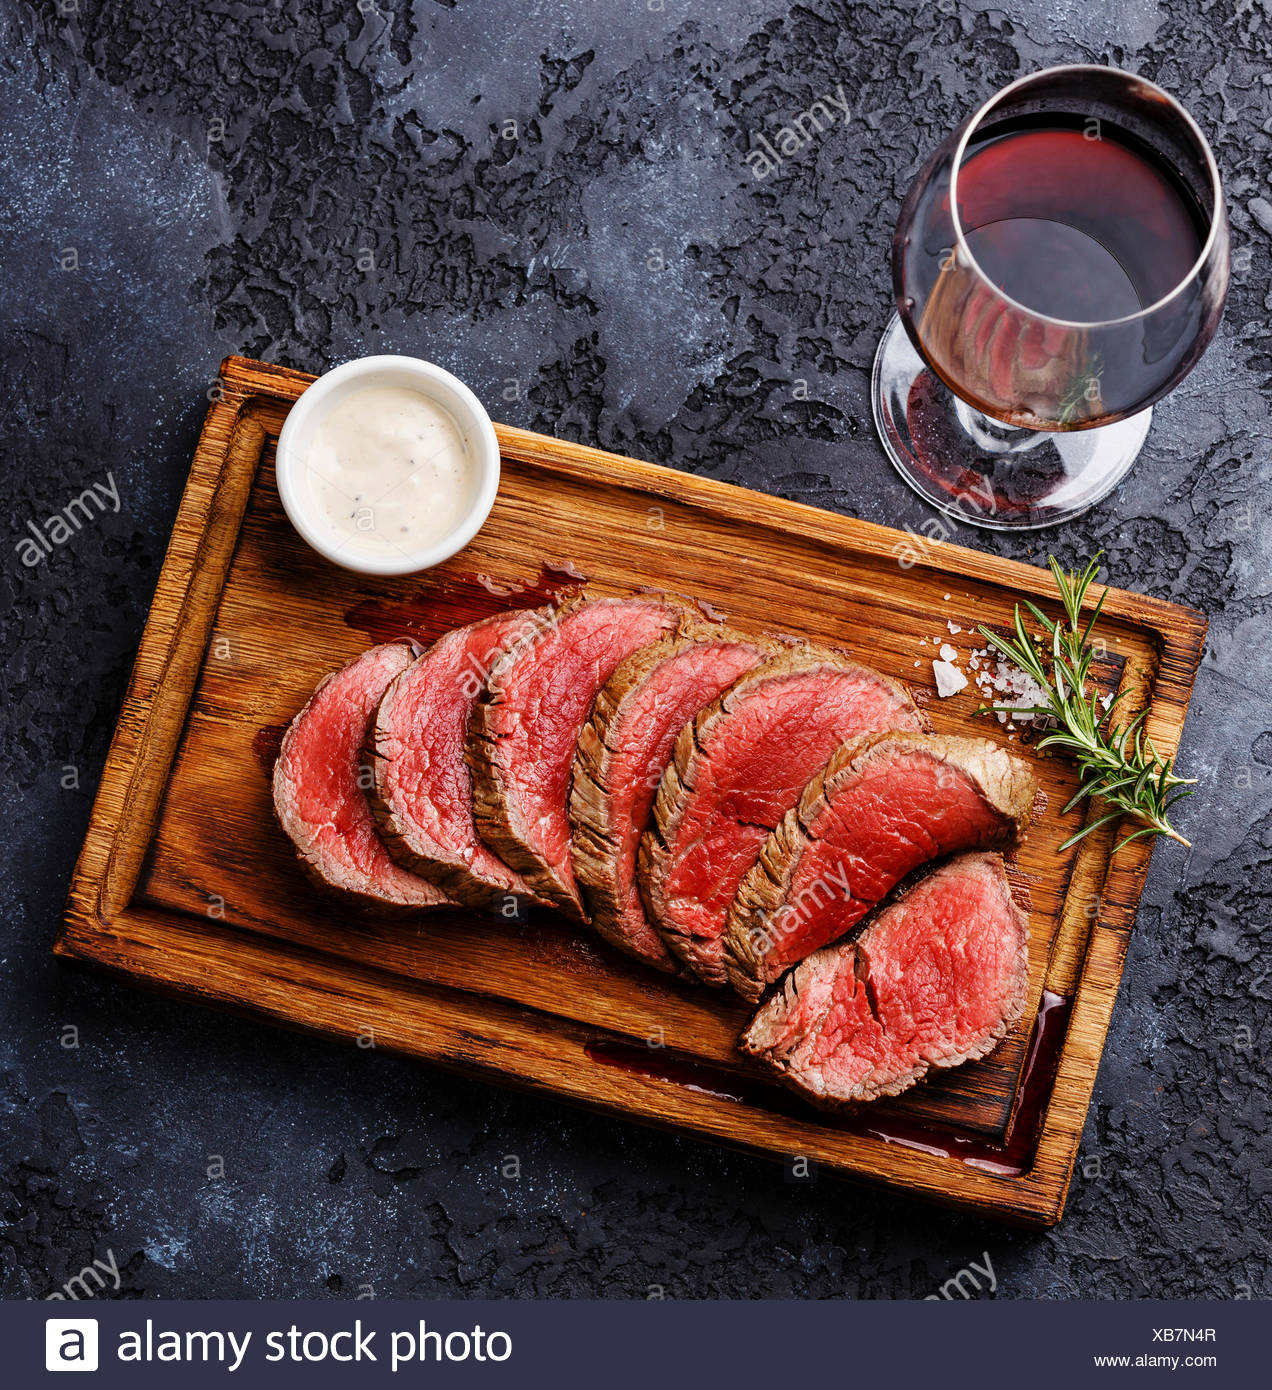 Sliced Grilled Tenderloin Steak Roastbeef And Pepper Sauce On Wooden Cutting Board And Red Wine On Dark Background Stock Photo Alamy